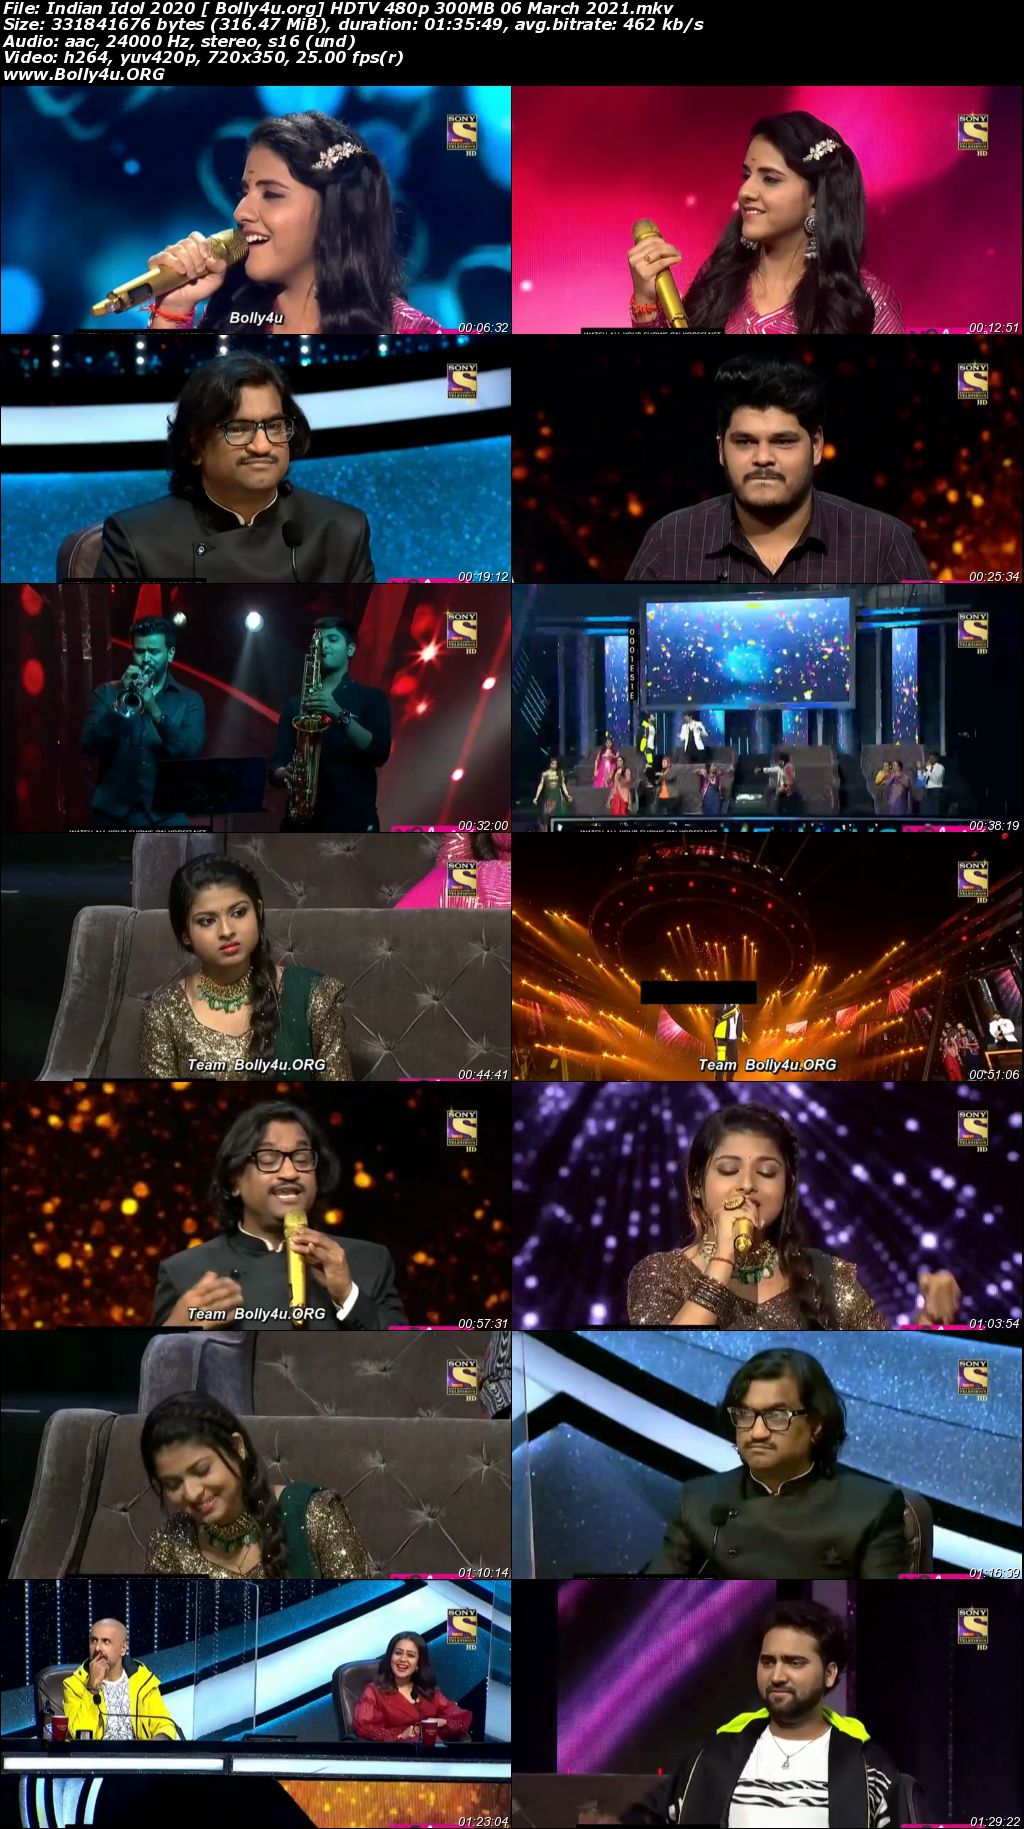 Indian Idol 2020 HDTV 480p 300MB 06 March 2021 Download